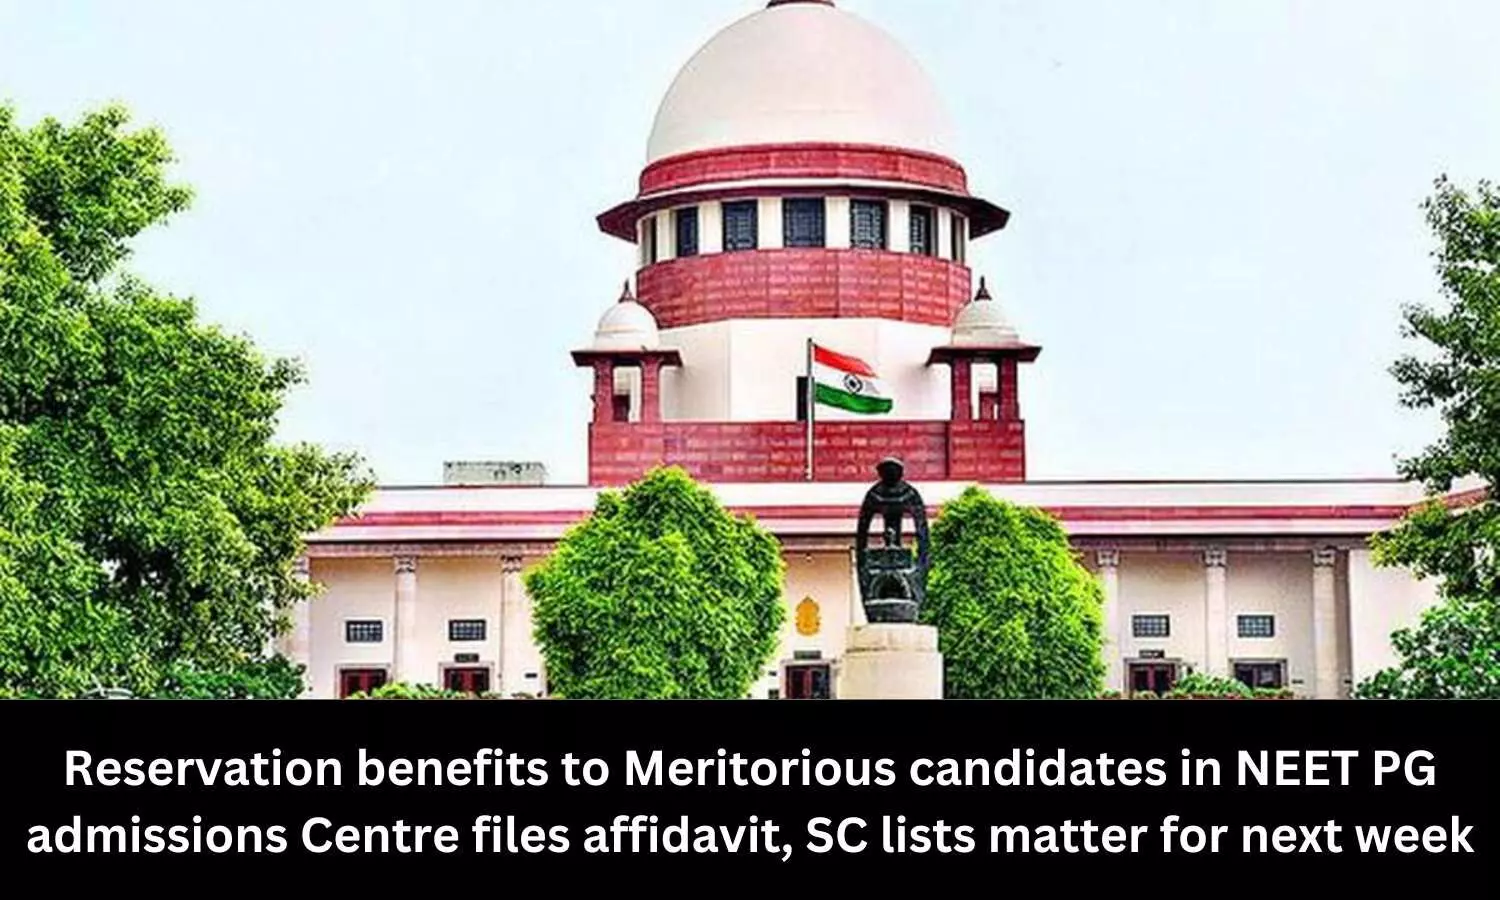 Reservation benefits to Meritorious candidates in NEET PG admissions Centre files affidavit, SC lists matter for next week